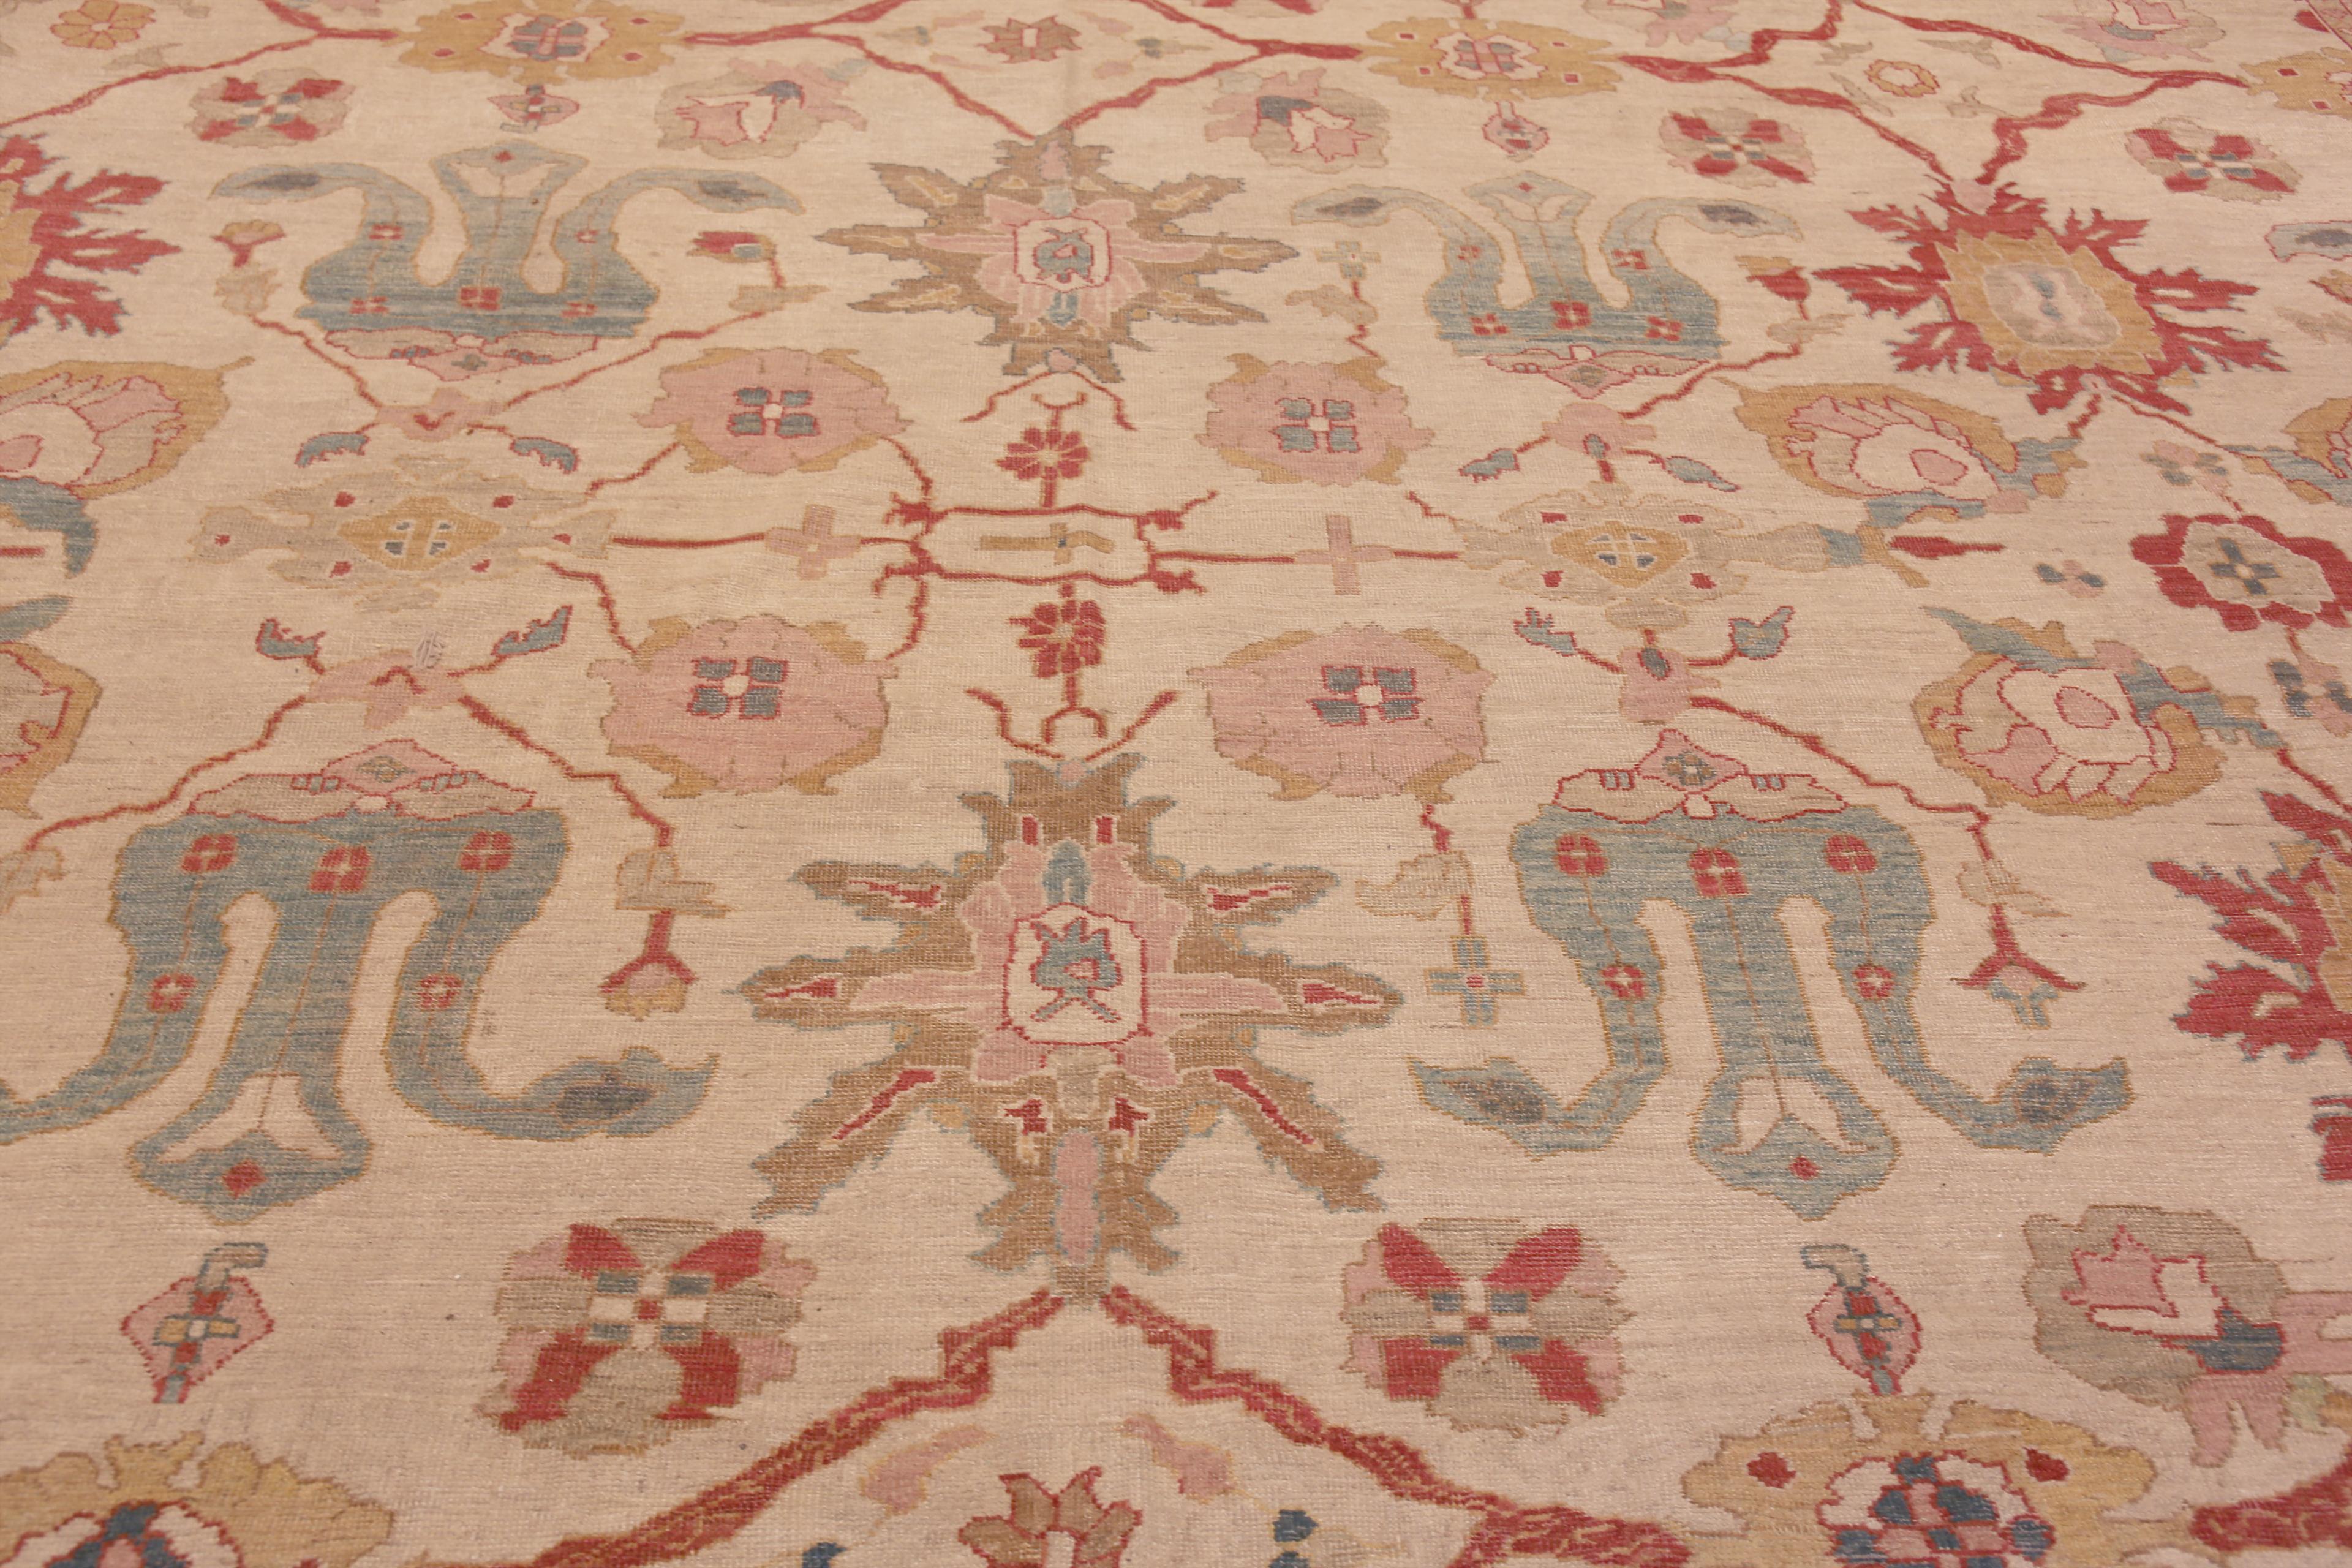 20th Century Oversized Ivory Happy Jewel Tone Antique Persian Sultanabad Rug 18'2